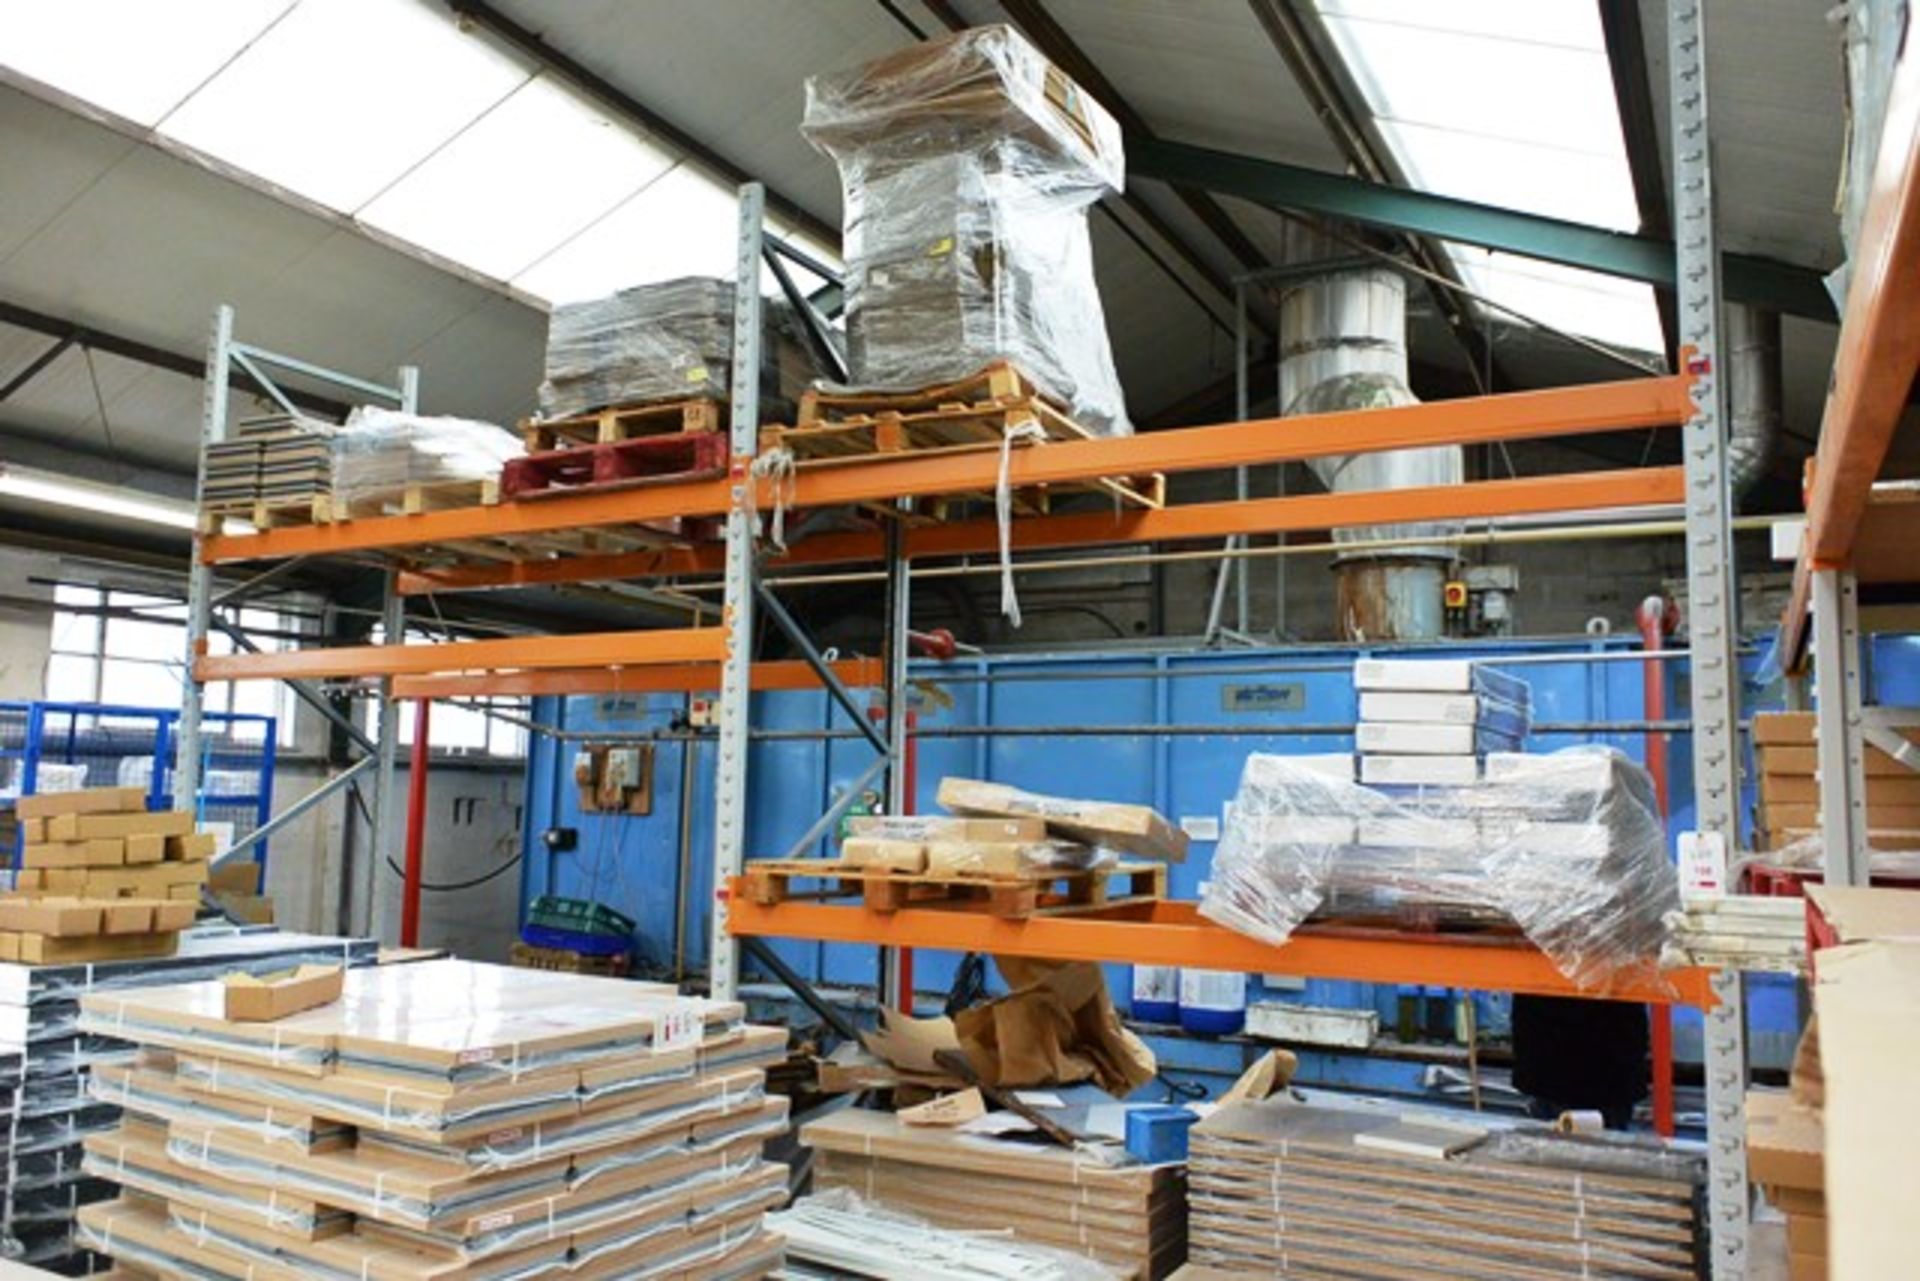 Two bays of adjustable boltless pallet racking, approx height 3.5m, approx 2.8m width per pay (